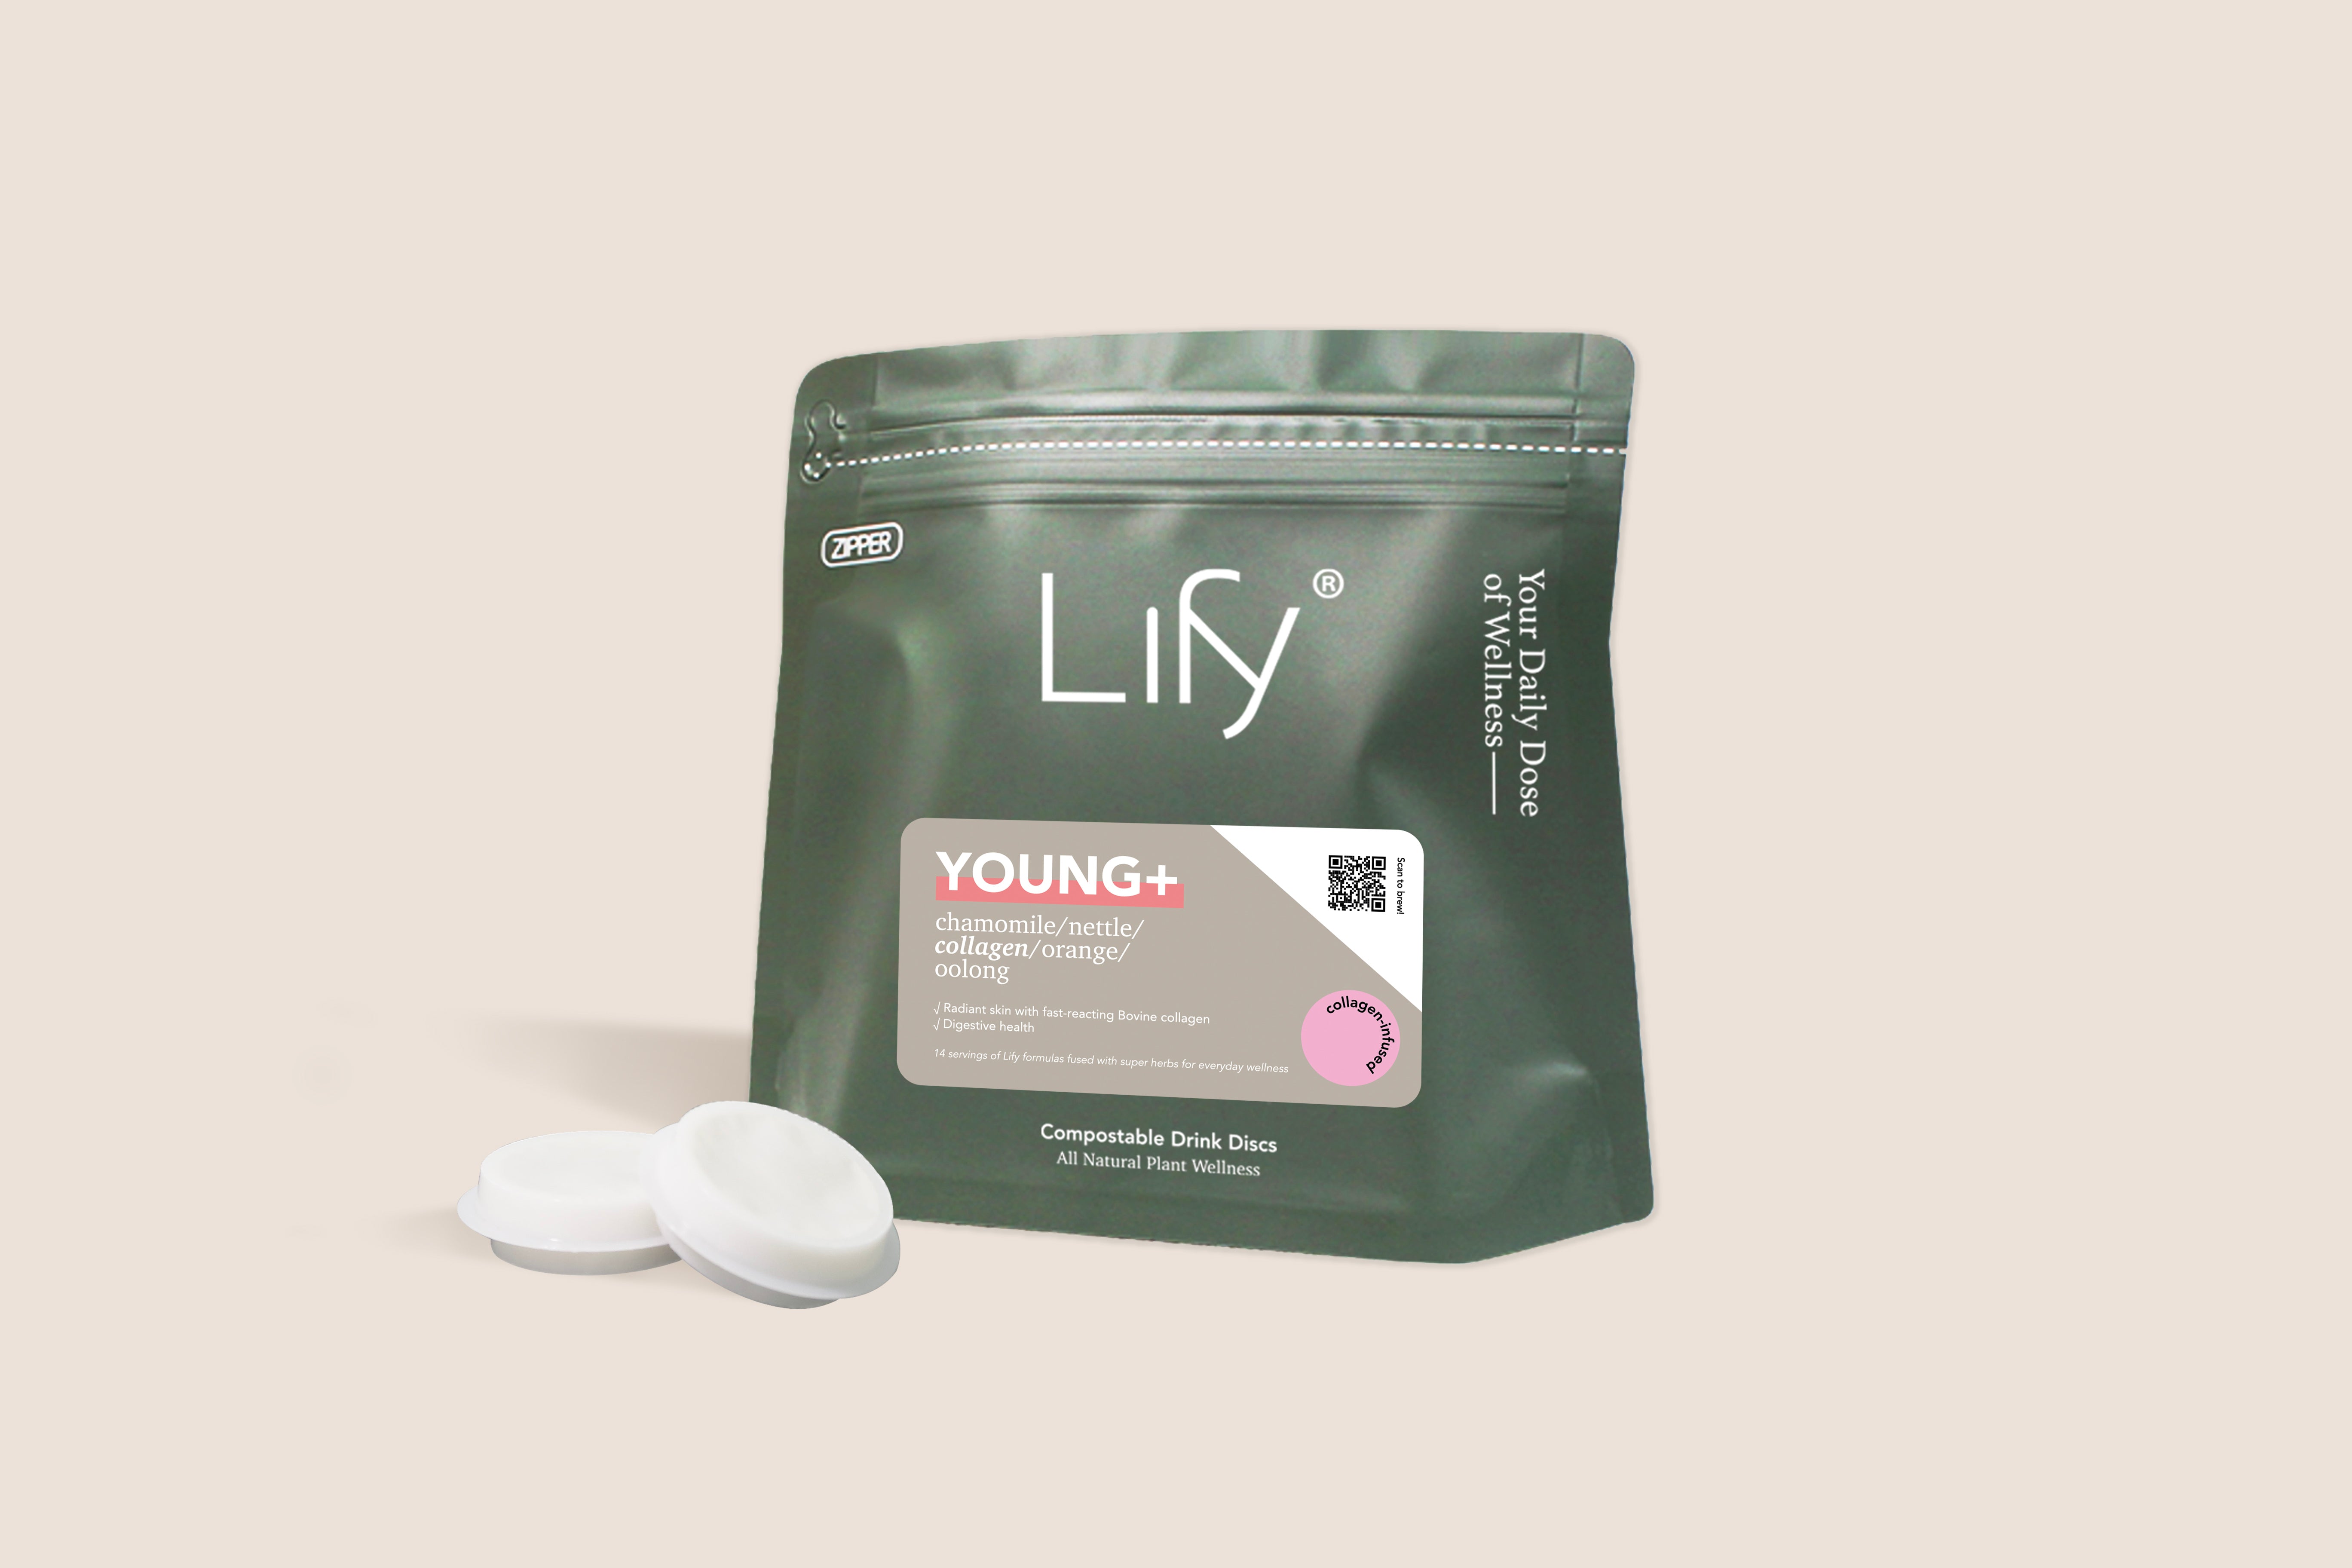 Young+ with Collagen - Lify Wellness